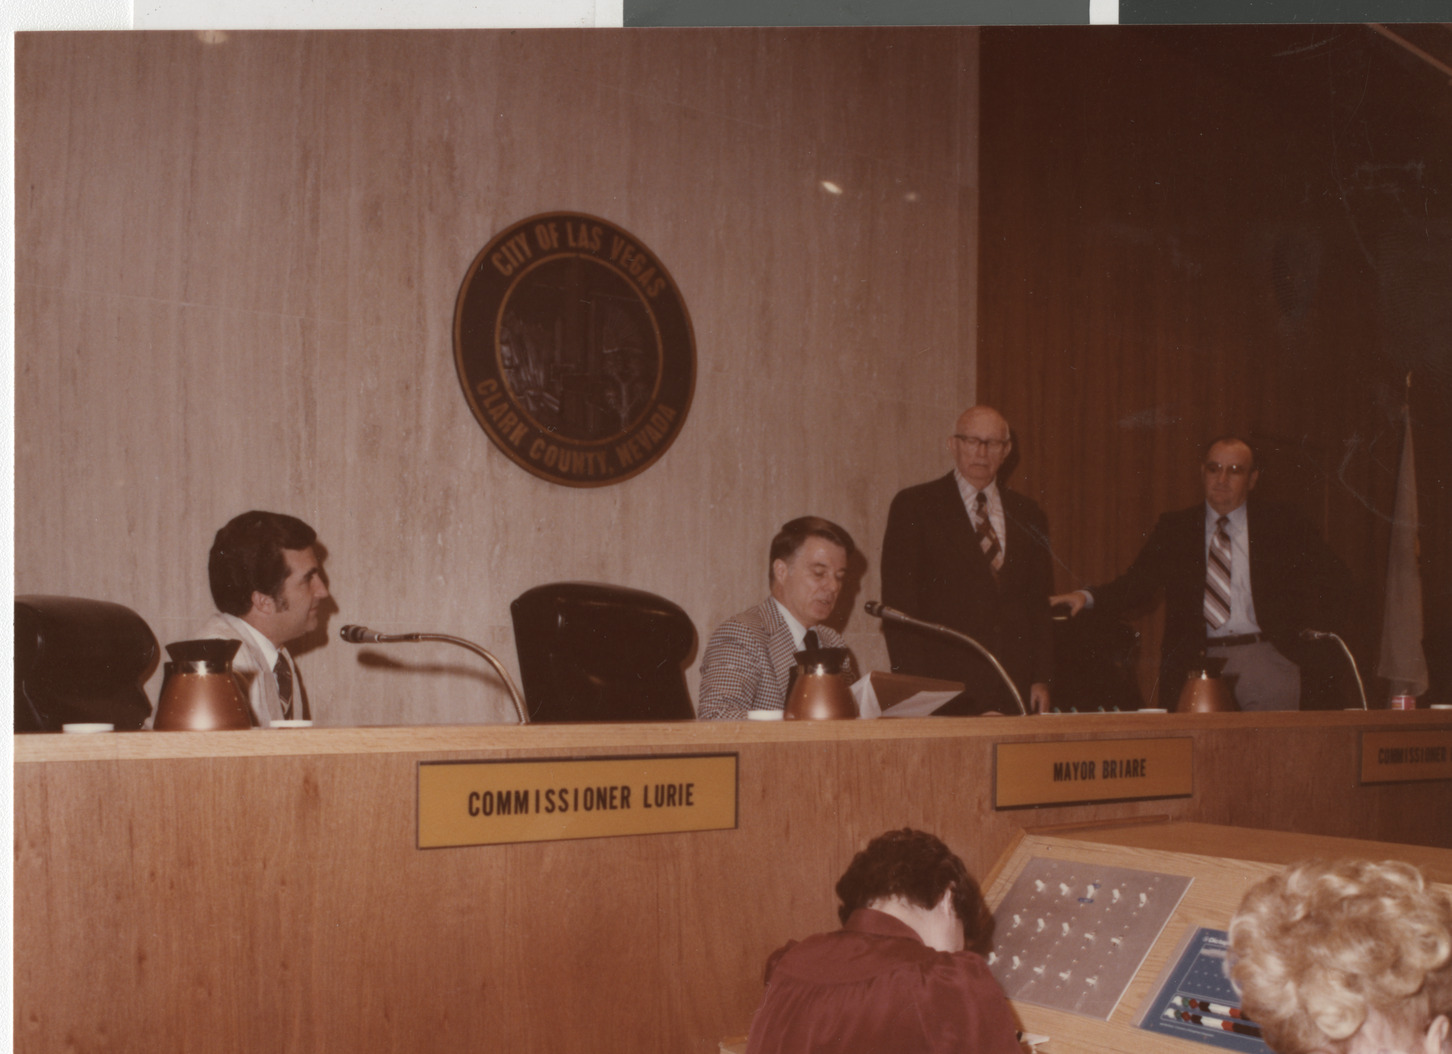 Photograph of Ron Lurie (left) and Mayor Briare, circa 1978